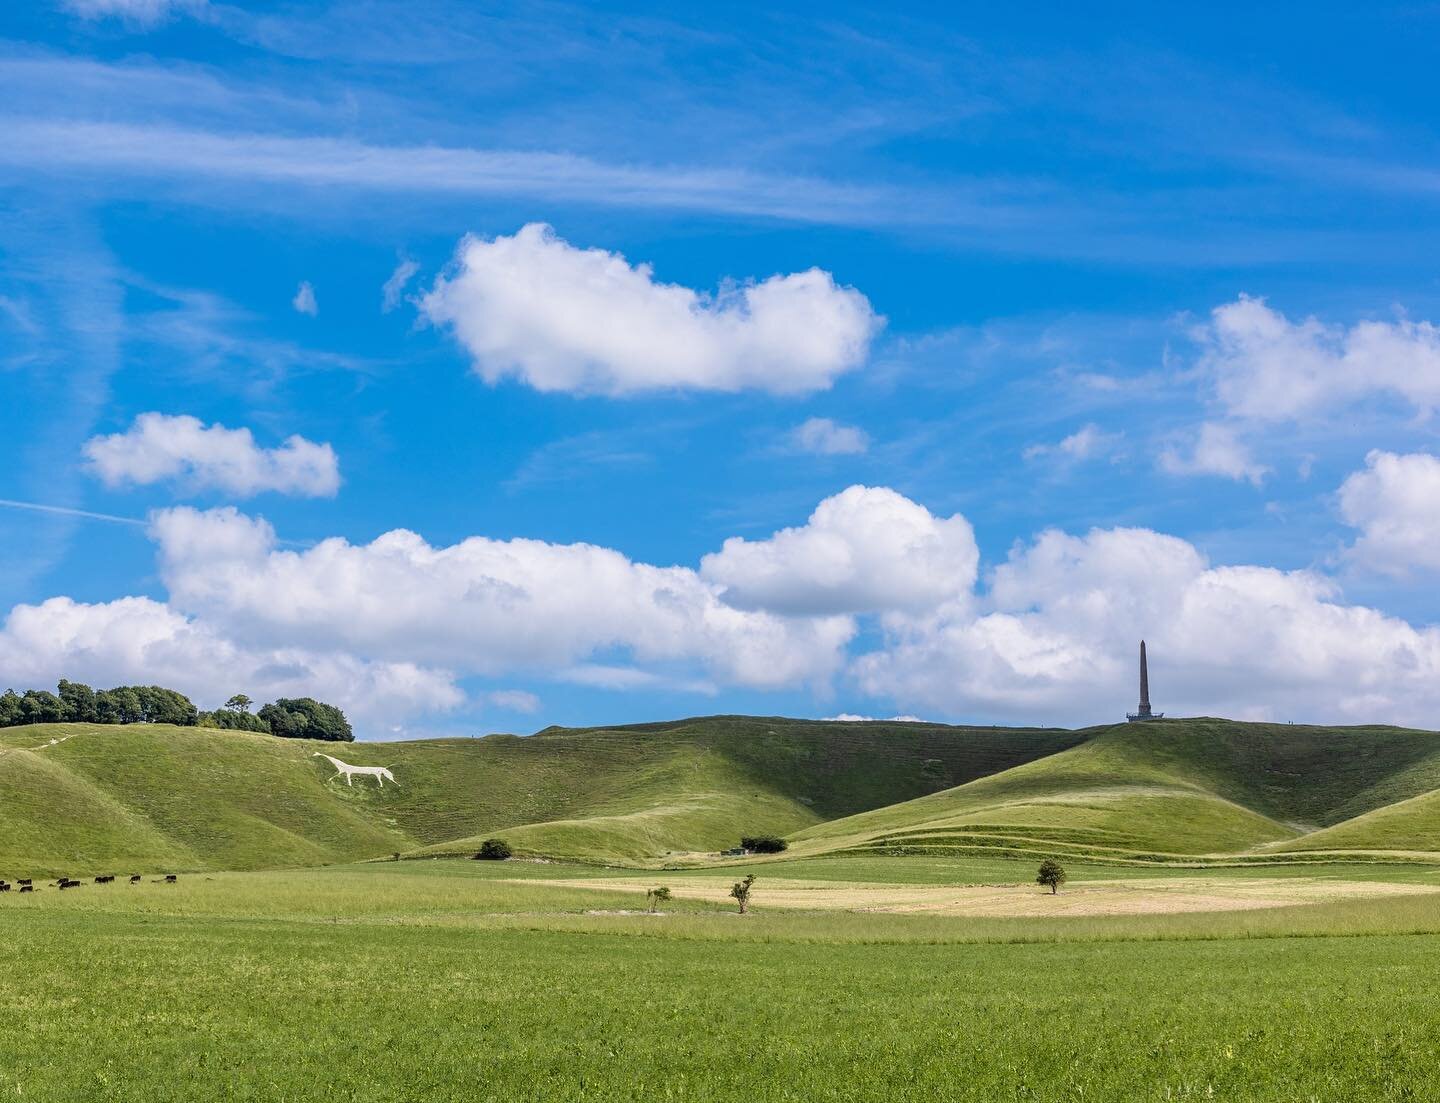 💚 Cherhill Downs 💙

We are very lucky to have such beautiful downland right on our doorstep. 

The Cherhill White Horse &amp; Landsdown Monument have been looking particularly beautiful in the glorious weather recently!
.
.
.
.
.
#cherhill#cherhill